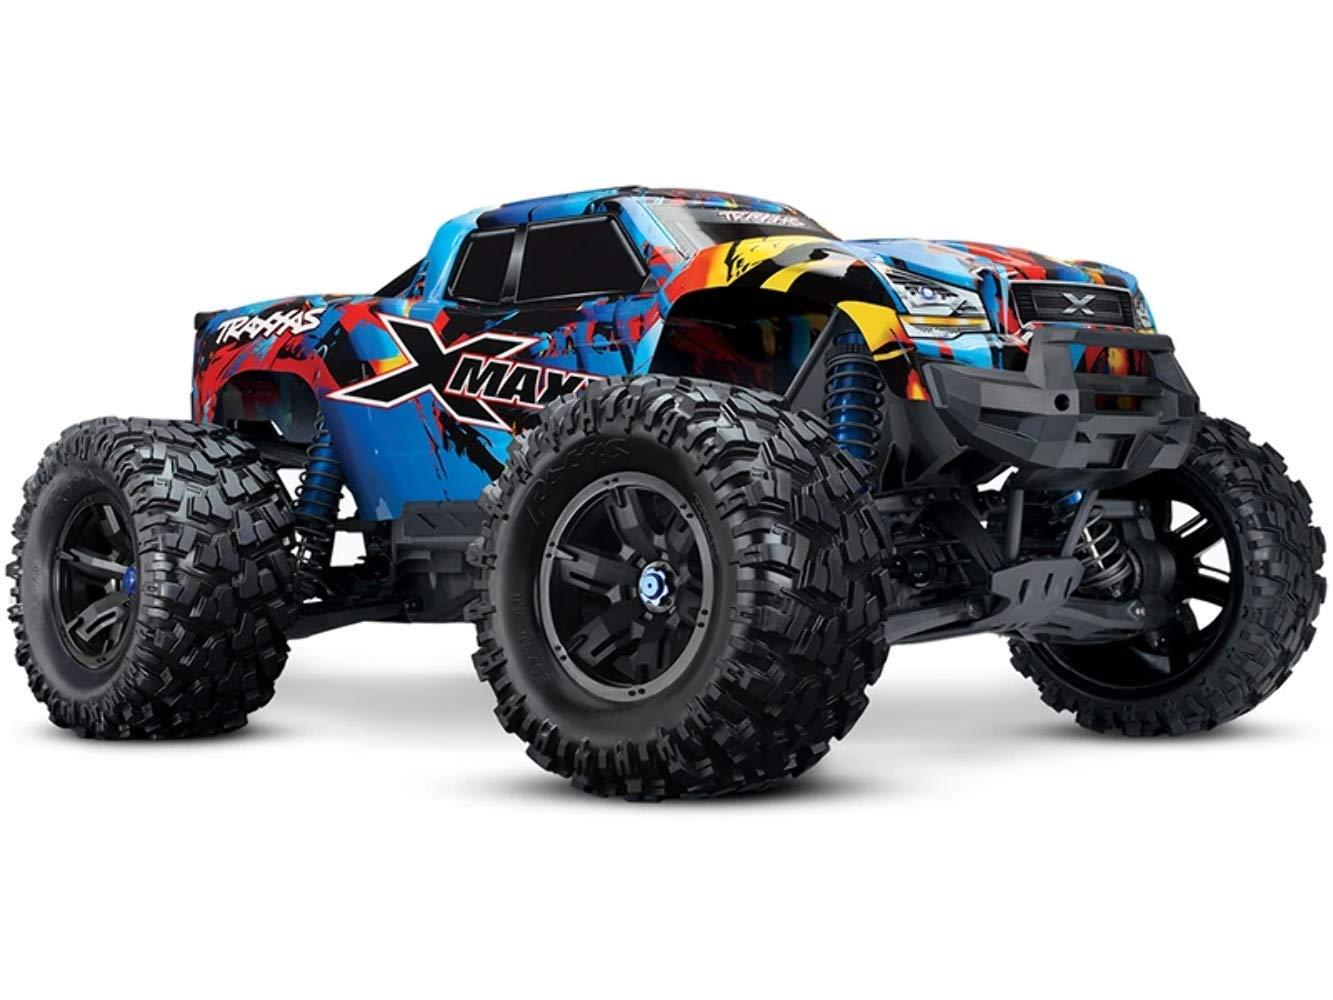 Traxxas Rc Cars Under $100: Budget-Friendly Traxxas RC Cars to Consider on Amazon